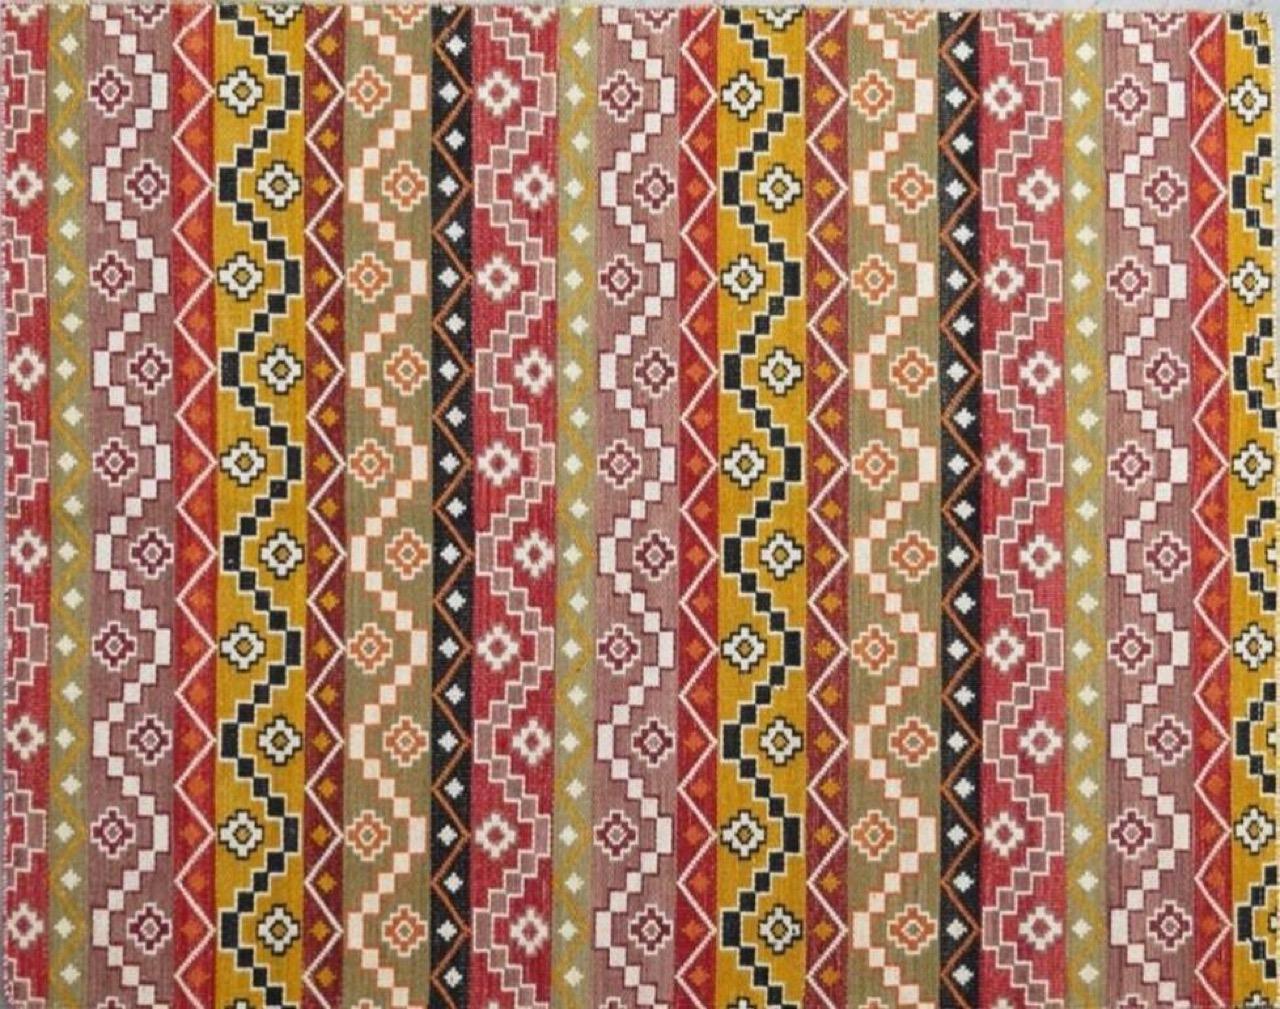 Nice new Kilim with beautiful Vienna decorative design and beautiful colors, entirely handwoven and embroidered with wool on cotton foundation.